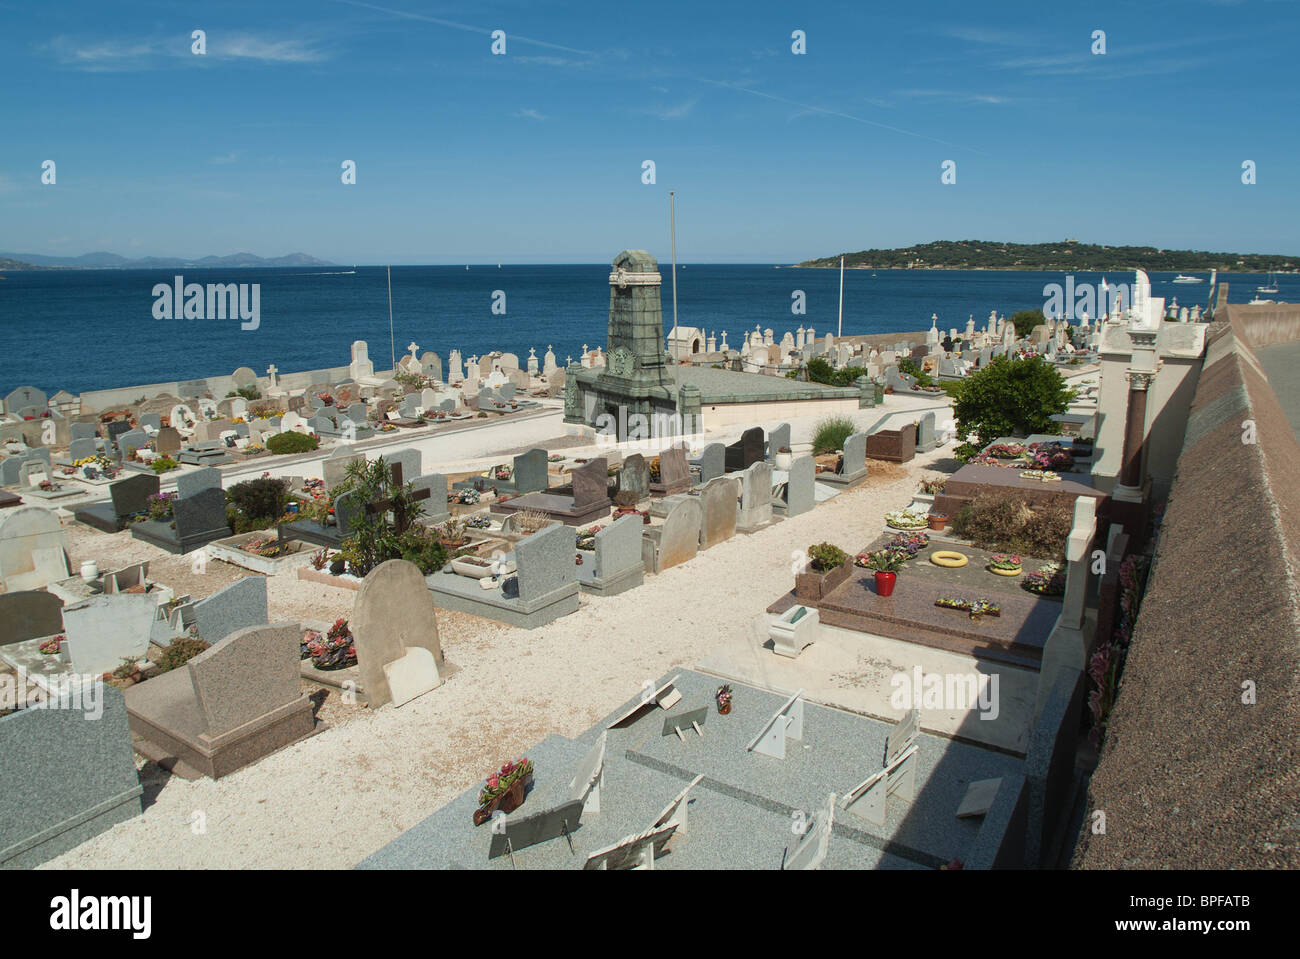 The cemetary in St. Tropez is close to the tourist area and has a beutiful view of the surrounding harbour. Stock Photo